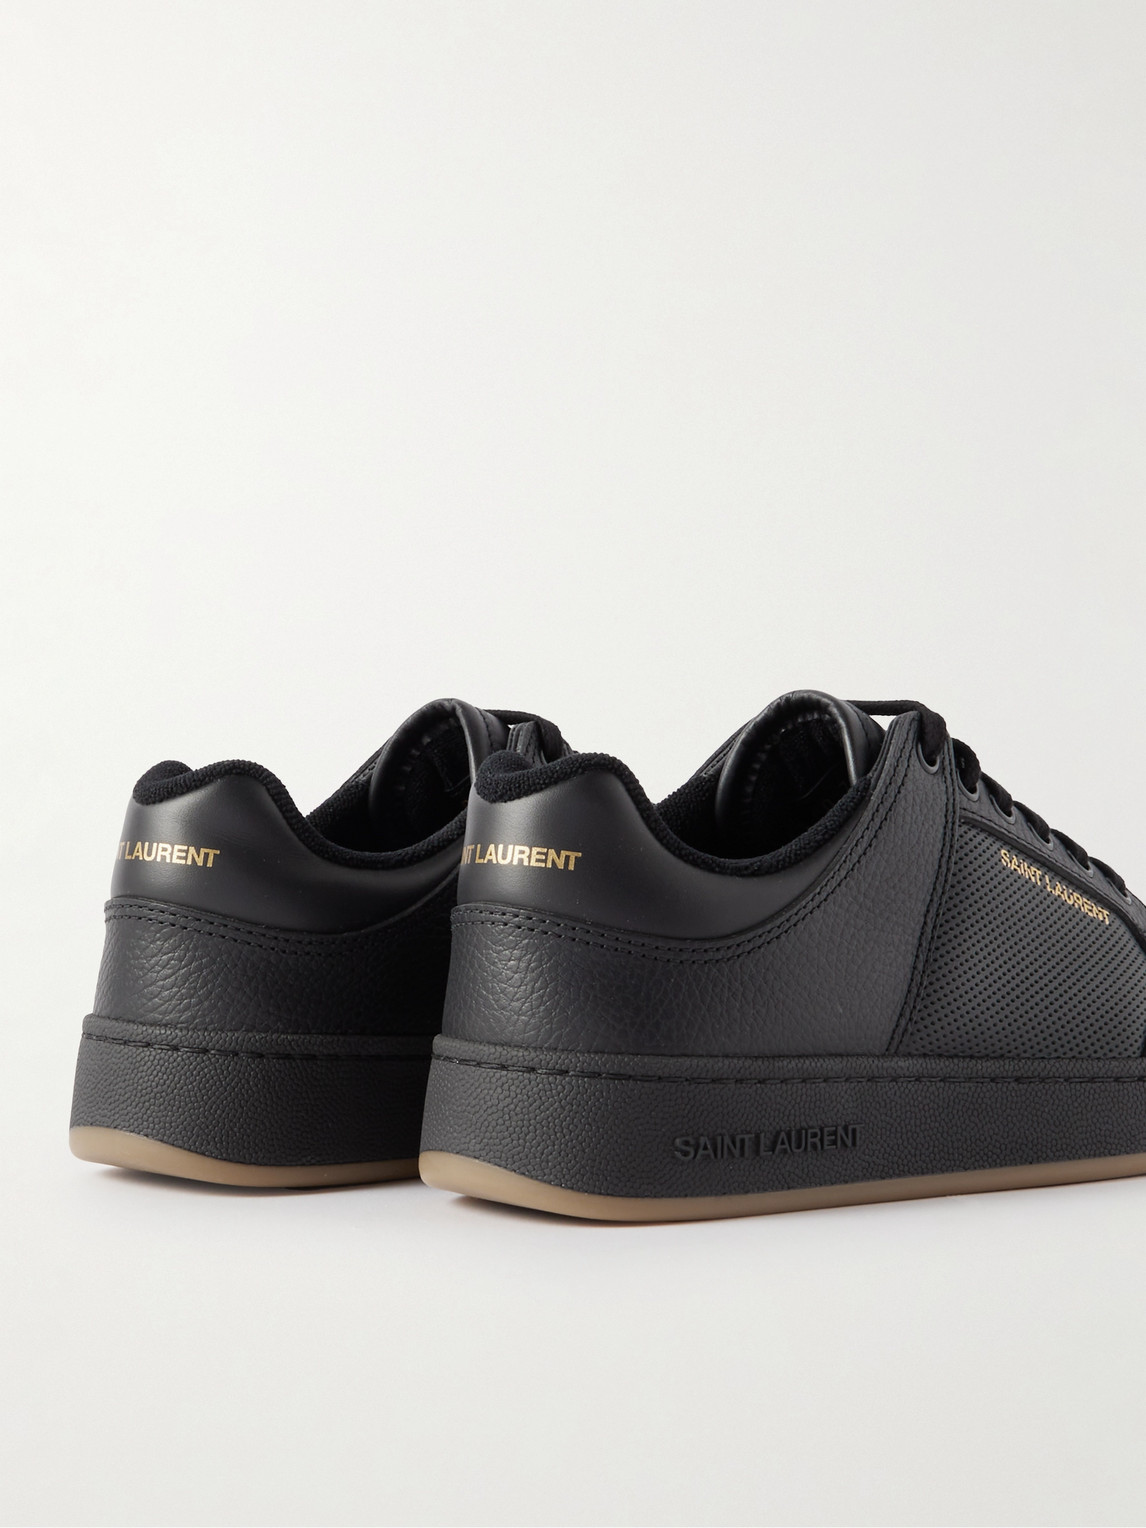 SAINT LAURENT SL/61 PERFORATED LEATHER SNEAKERS 